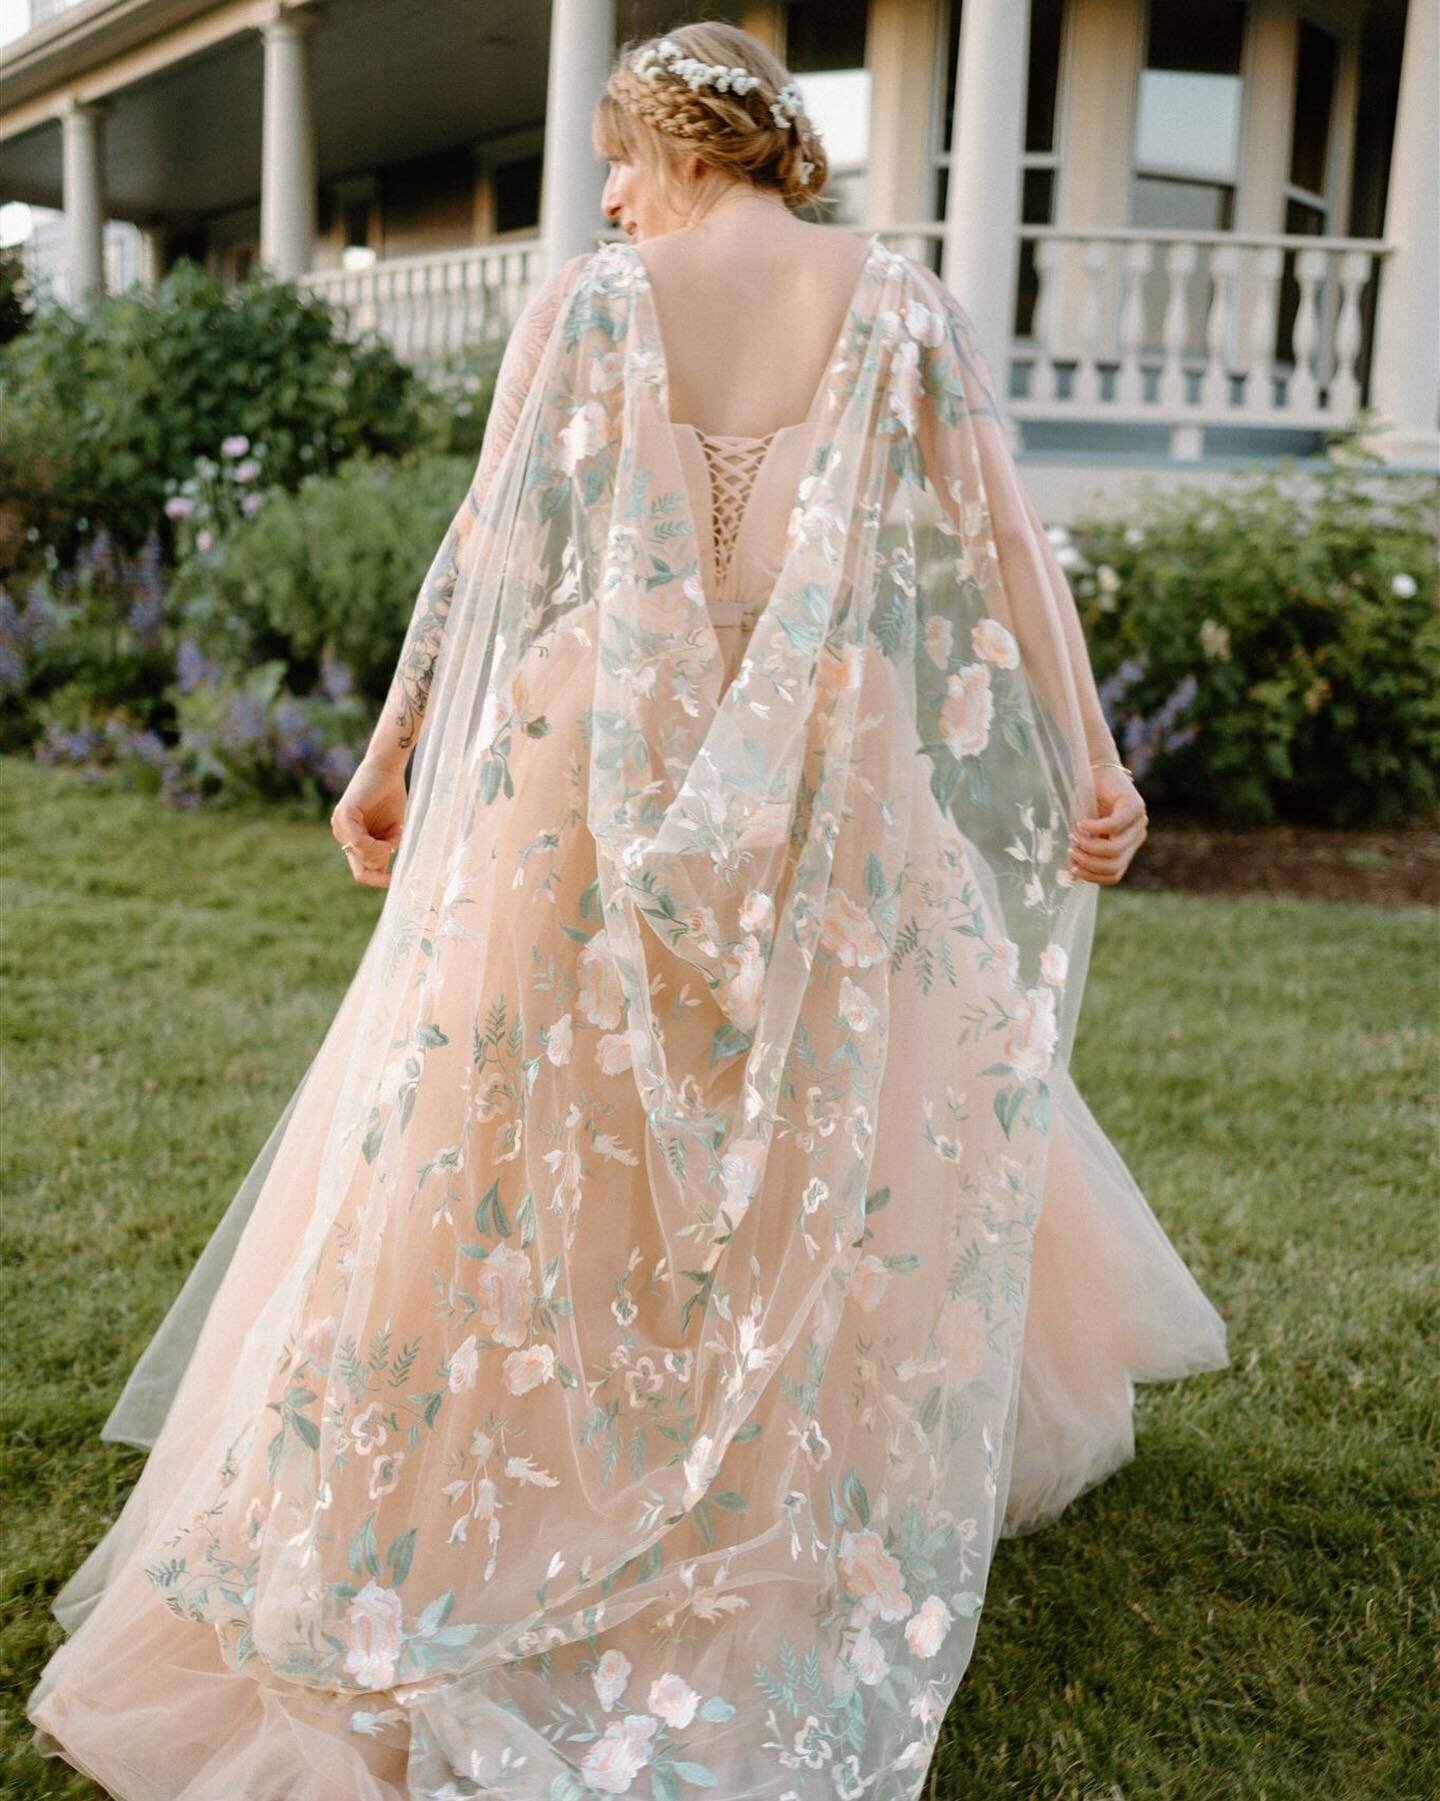 ✨ CAPE LOVE ✨

Beautiful Real Bride Rae chose our Dahlia cape to complement her blush skirt for her Oregon wedding and had this to say about it:
&bull;
&ldquo;Thanks again for making the world's most magical cape - the true showstopper piece of my en